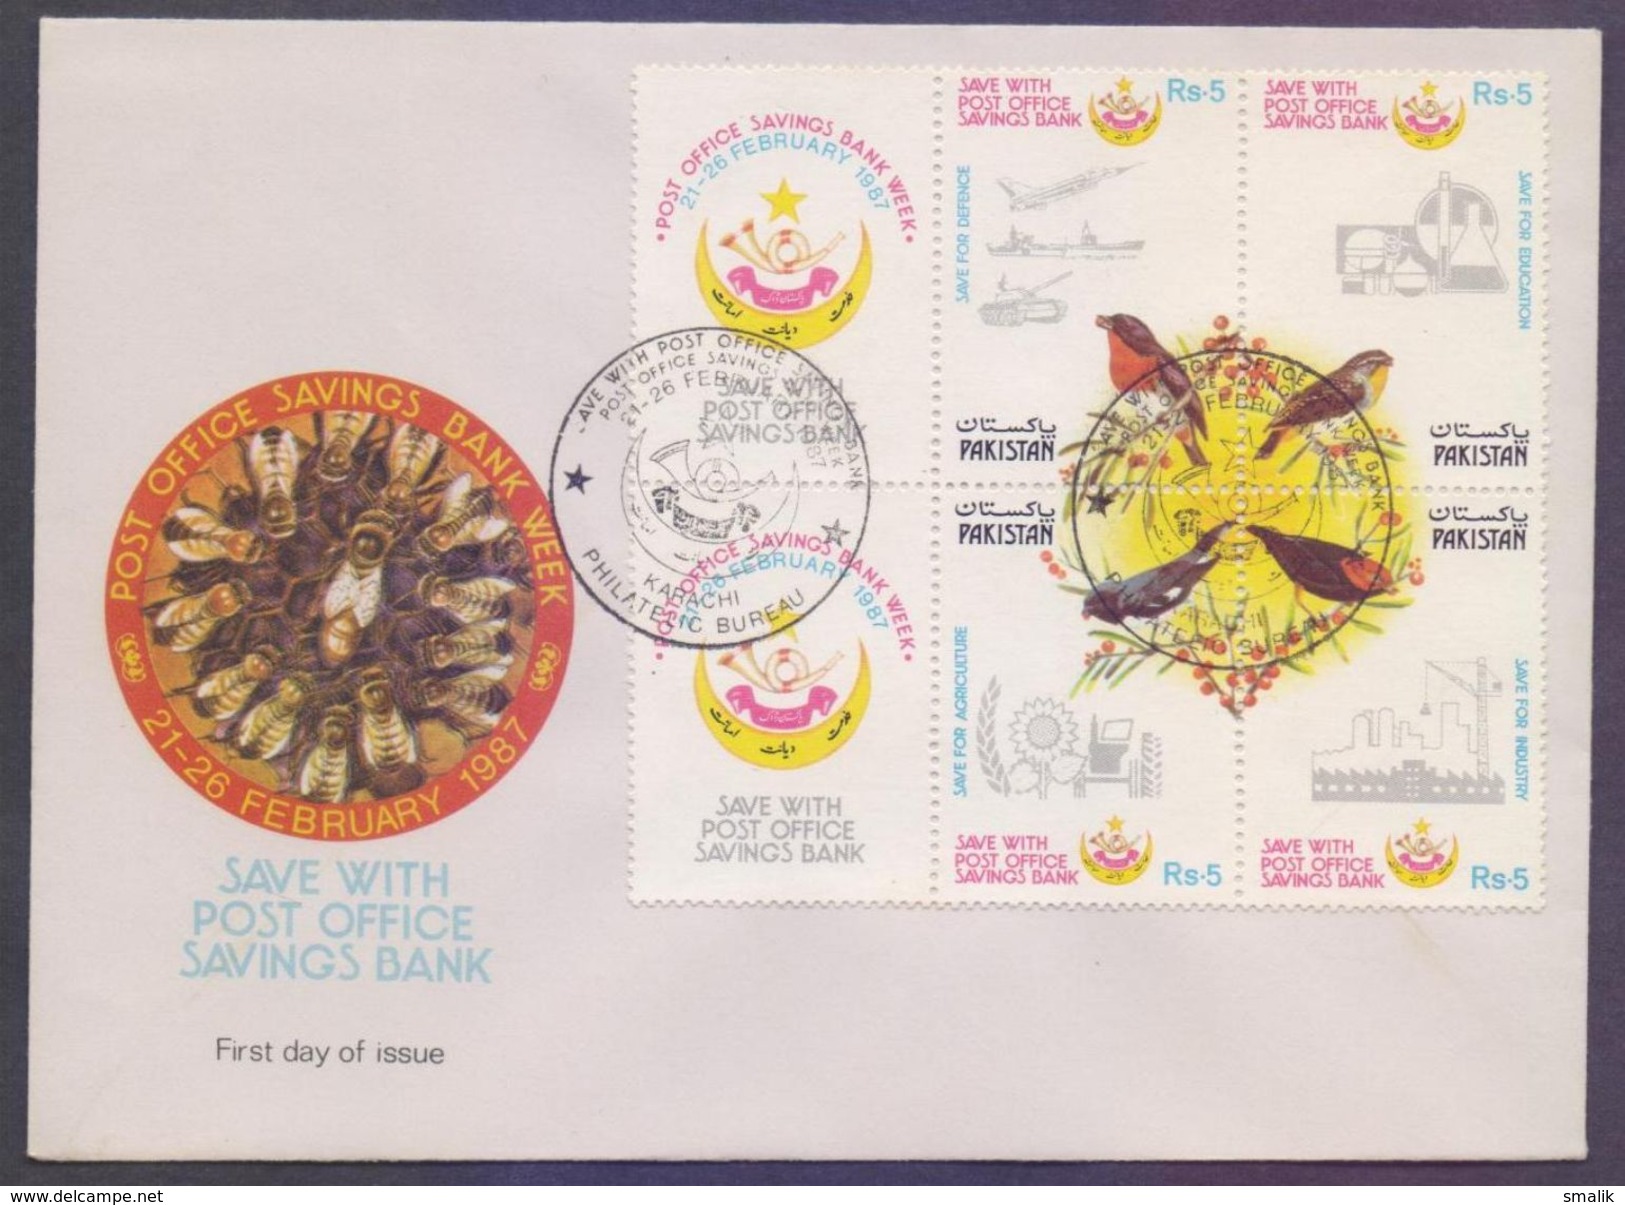 PAKISTAN 1987 FDC - Save With Post Office Savings Bank, Birds, Complete Set With Side Labels On FDC - Pakistan